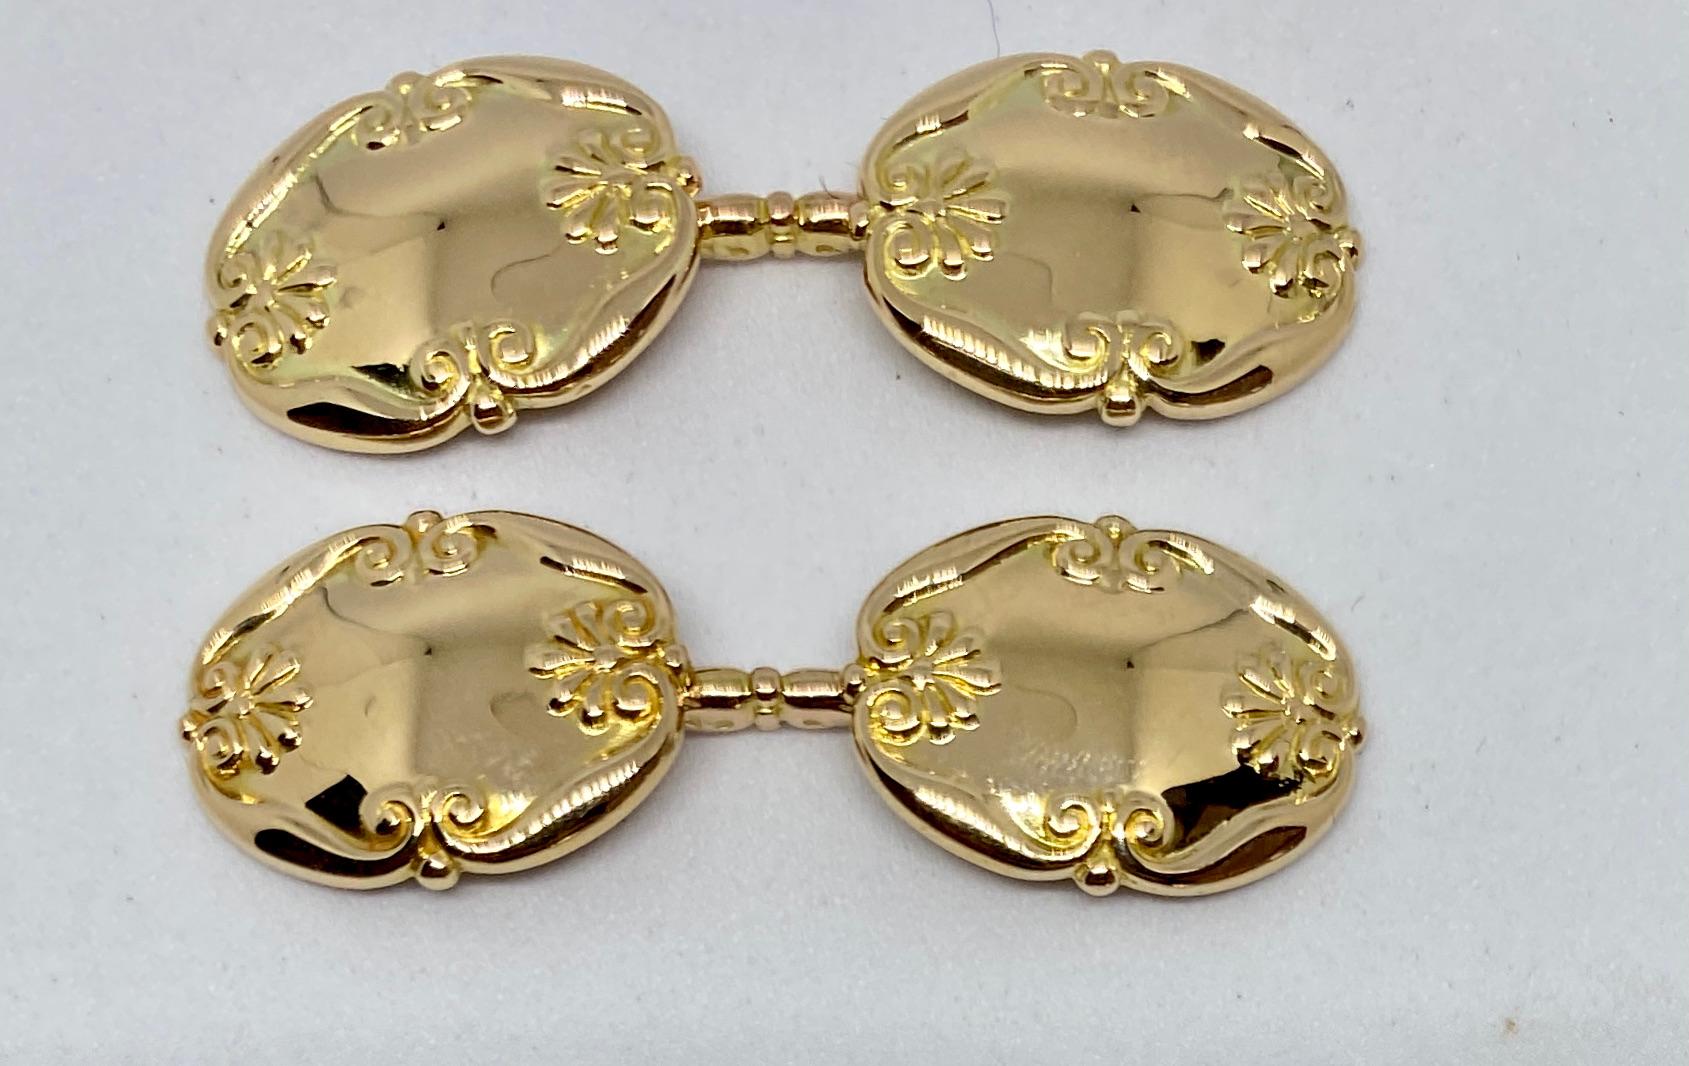 Extremely rare, beautifully made Art Nouveau cufflinks in solid yellow gold by American jeweler Marcus & Company. Founded in the late 19th Century by Herman Marcus, the firm was most famous for its prize-winning Art Nouveau jewelry, and today is